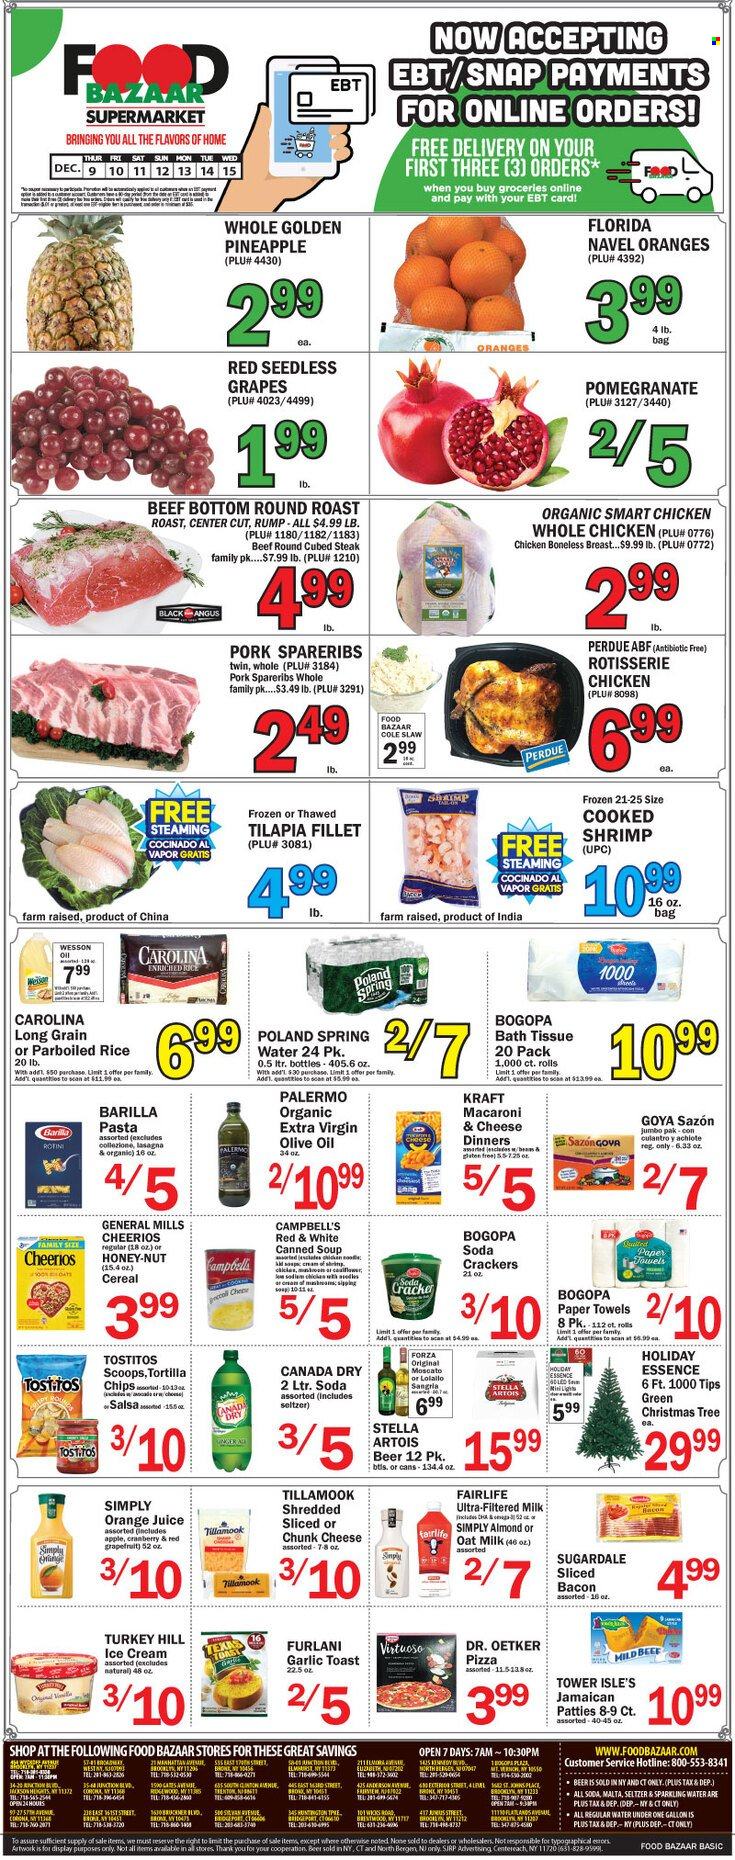 thumbnail - Food Bazaar Flyer - 12/09/2021 - 12/15/2021 - Sales products - seedless grapes, grapes, pineapple, tilapia, shrimps, Campbell's, macaroni & cheese, pizza, chicken roast, soup, pasta, Barilla, lasagna meal, Perdue®, Kraft®, Sugardale, bacon, Dr. Oetker, chunk cheese, milk, oat milk, ice cream, crackers, tortilla chips, Tostitos, Goya, cereals, Cheerios, rice, parboiled rice, salsa, extra virgin olive oil, olive oil, oil, Canada Dry, orange juice, juice, seltzer water, spring water, soda, sparkling water, Moscato, beer, whole chicken, beef meat, steak, round roast, pork spare ribs, Stella Artois, pomegranate, navel oranges. Page 1.